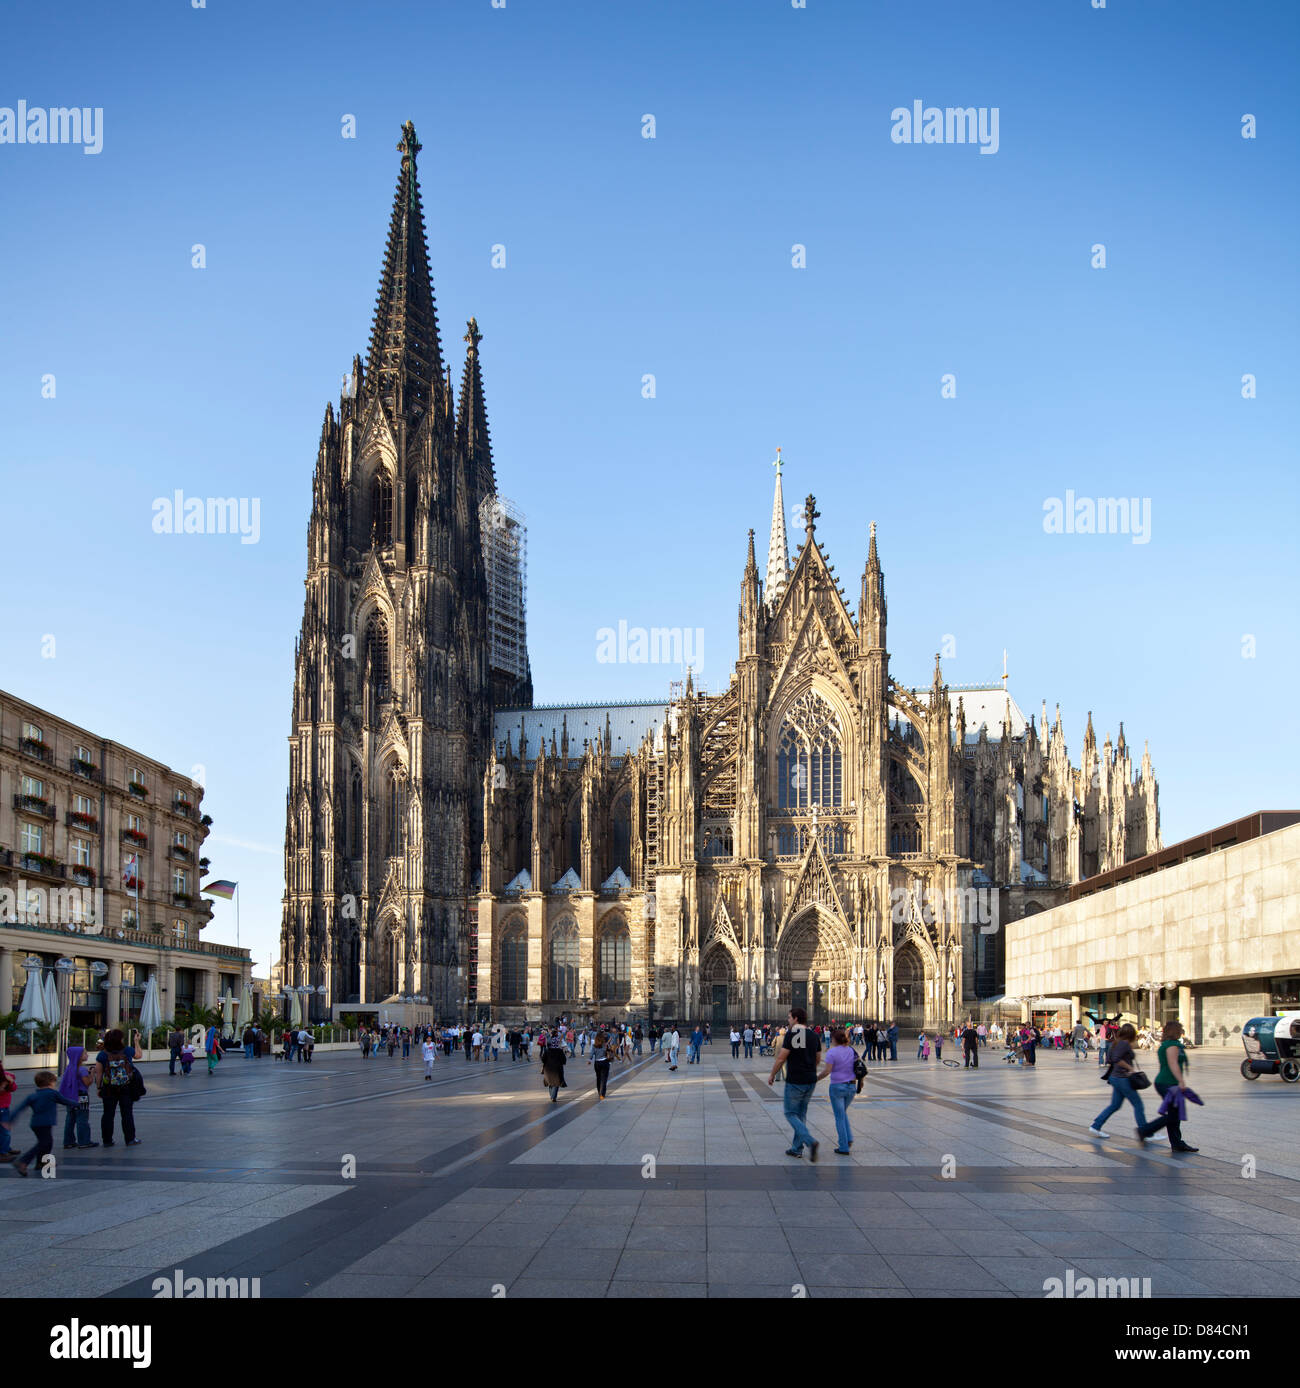 The famous cologne cathedral in Germany during daytime with tourists in the foreground. Perspective corrected panorama. Stock Photo